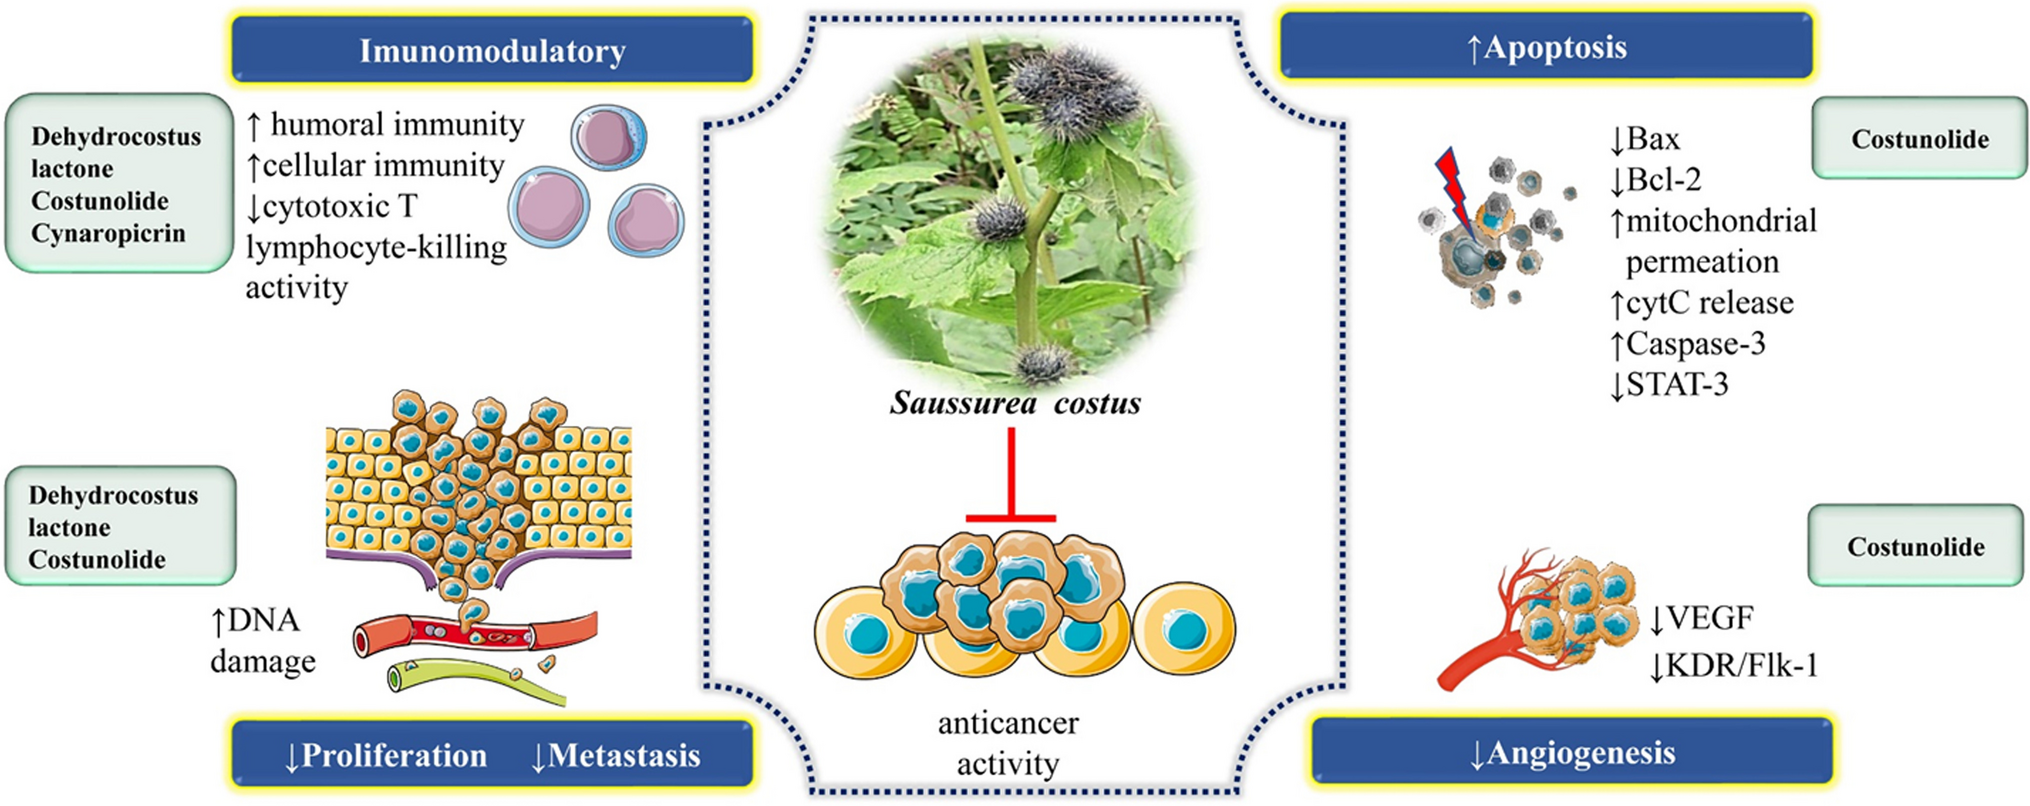 Saussurea costus (Falc.) Lipsch.: a comprehensive review of its pharmacology, phytochemicals, ethnobotanical uses, and therapeutic potential